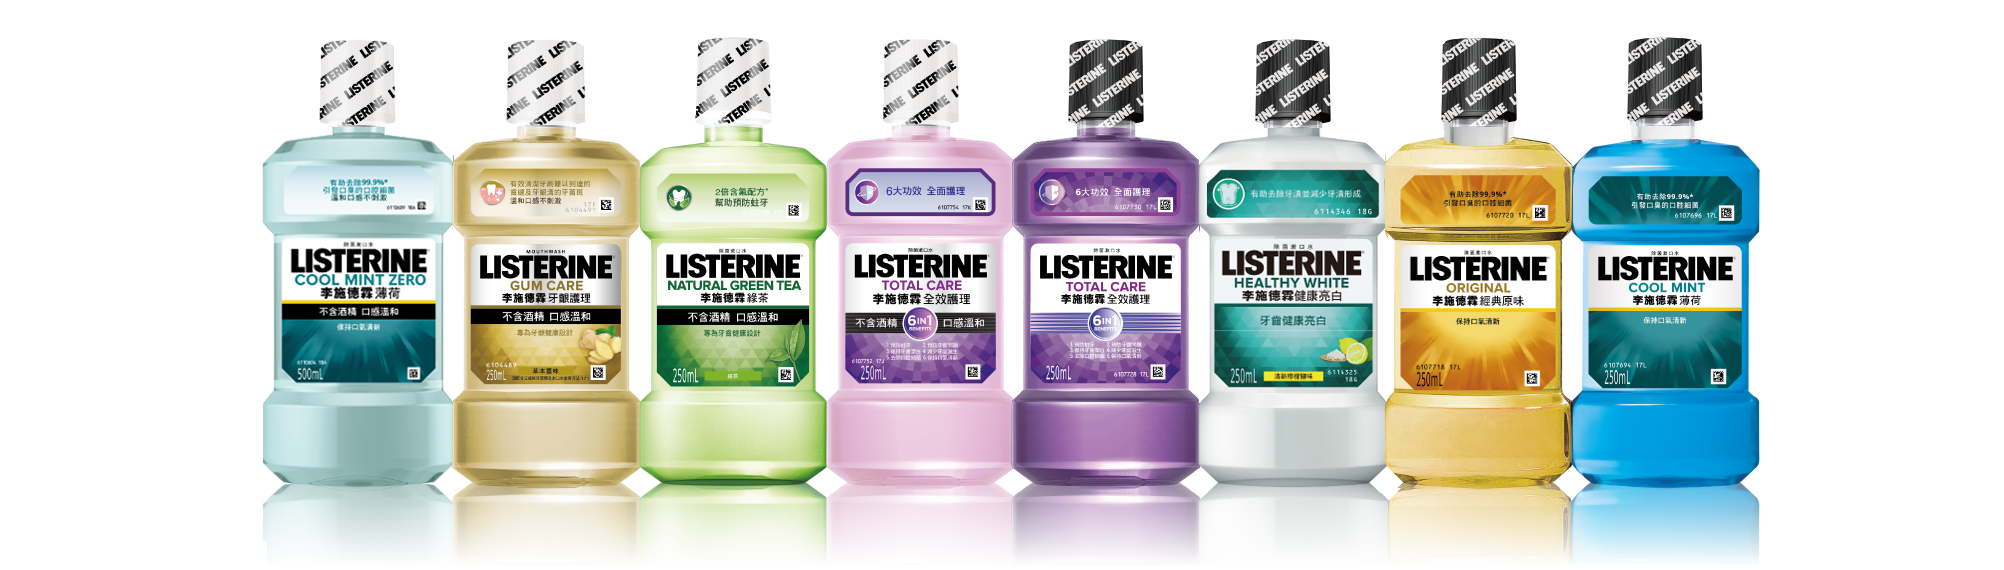 listerine-all-product.png